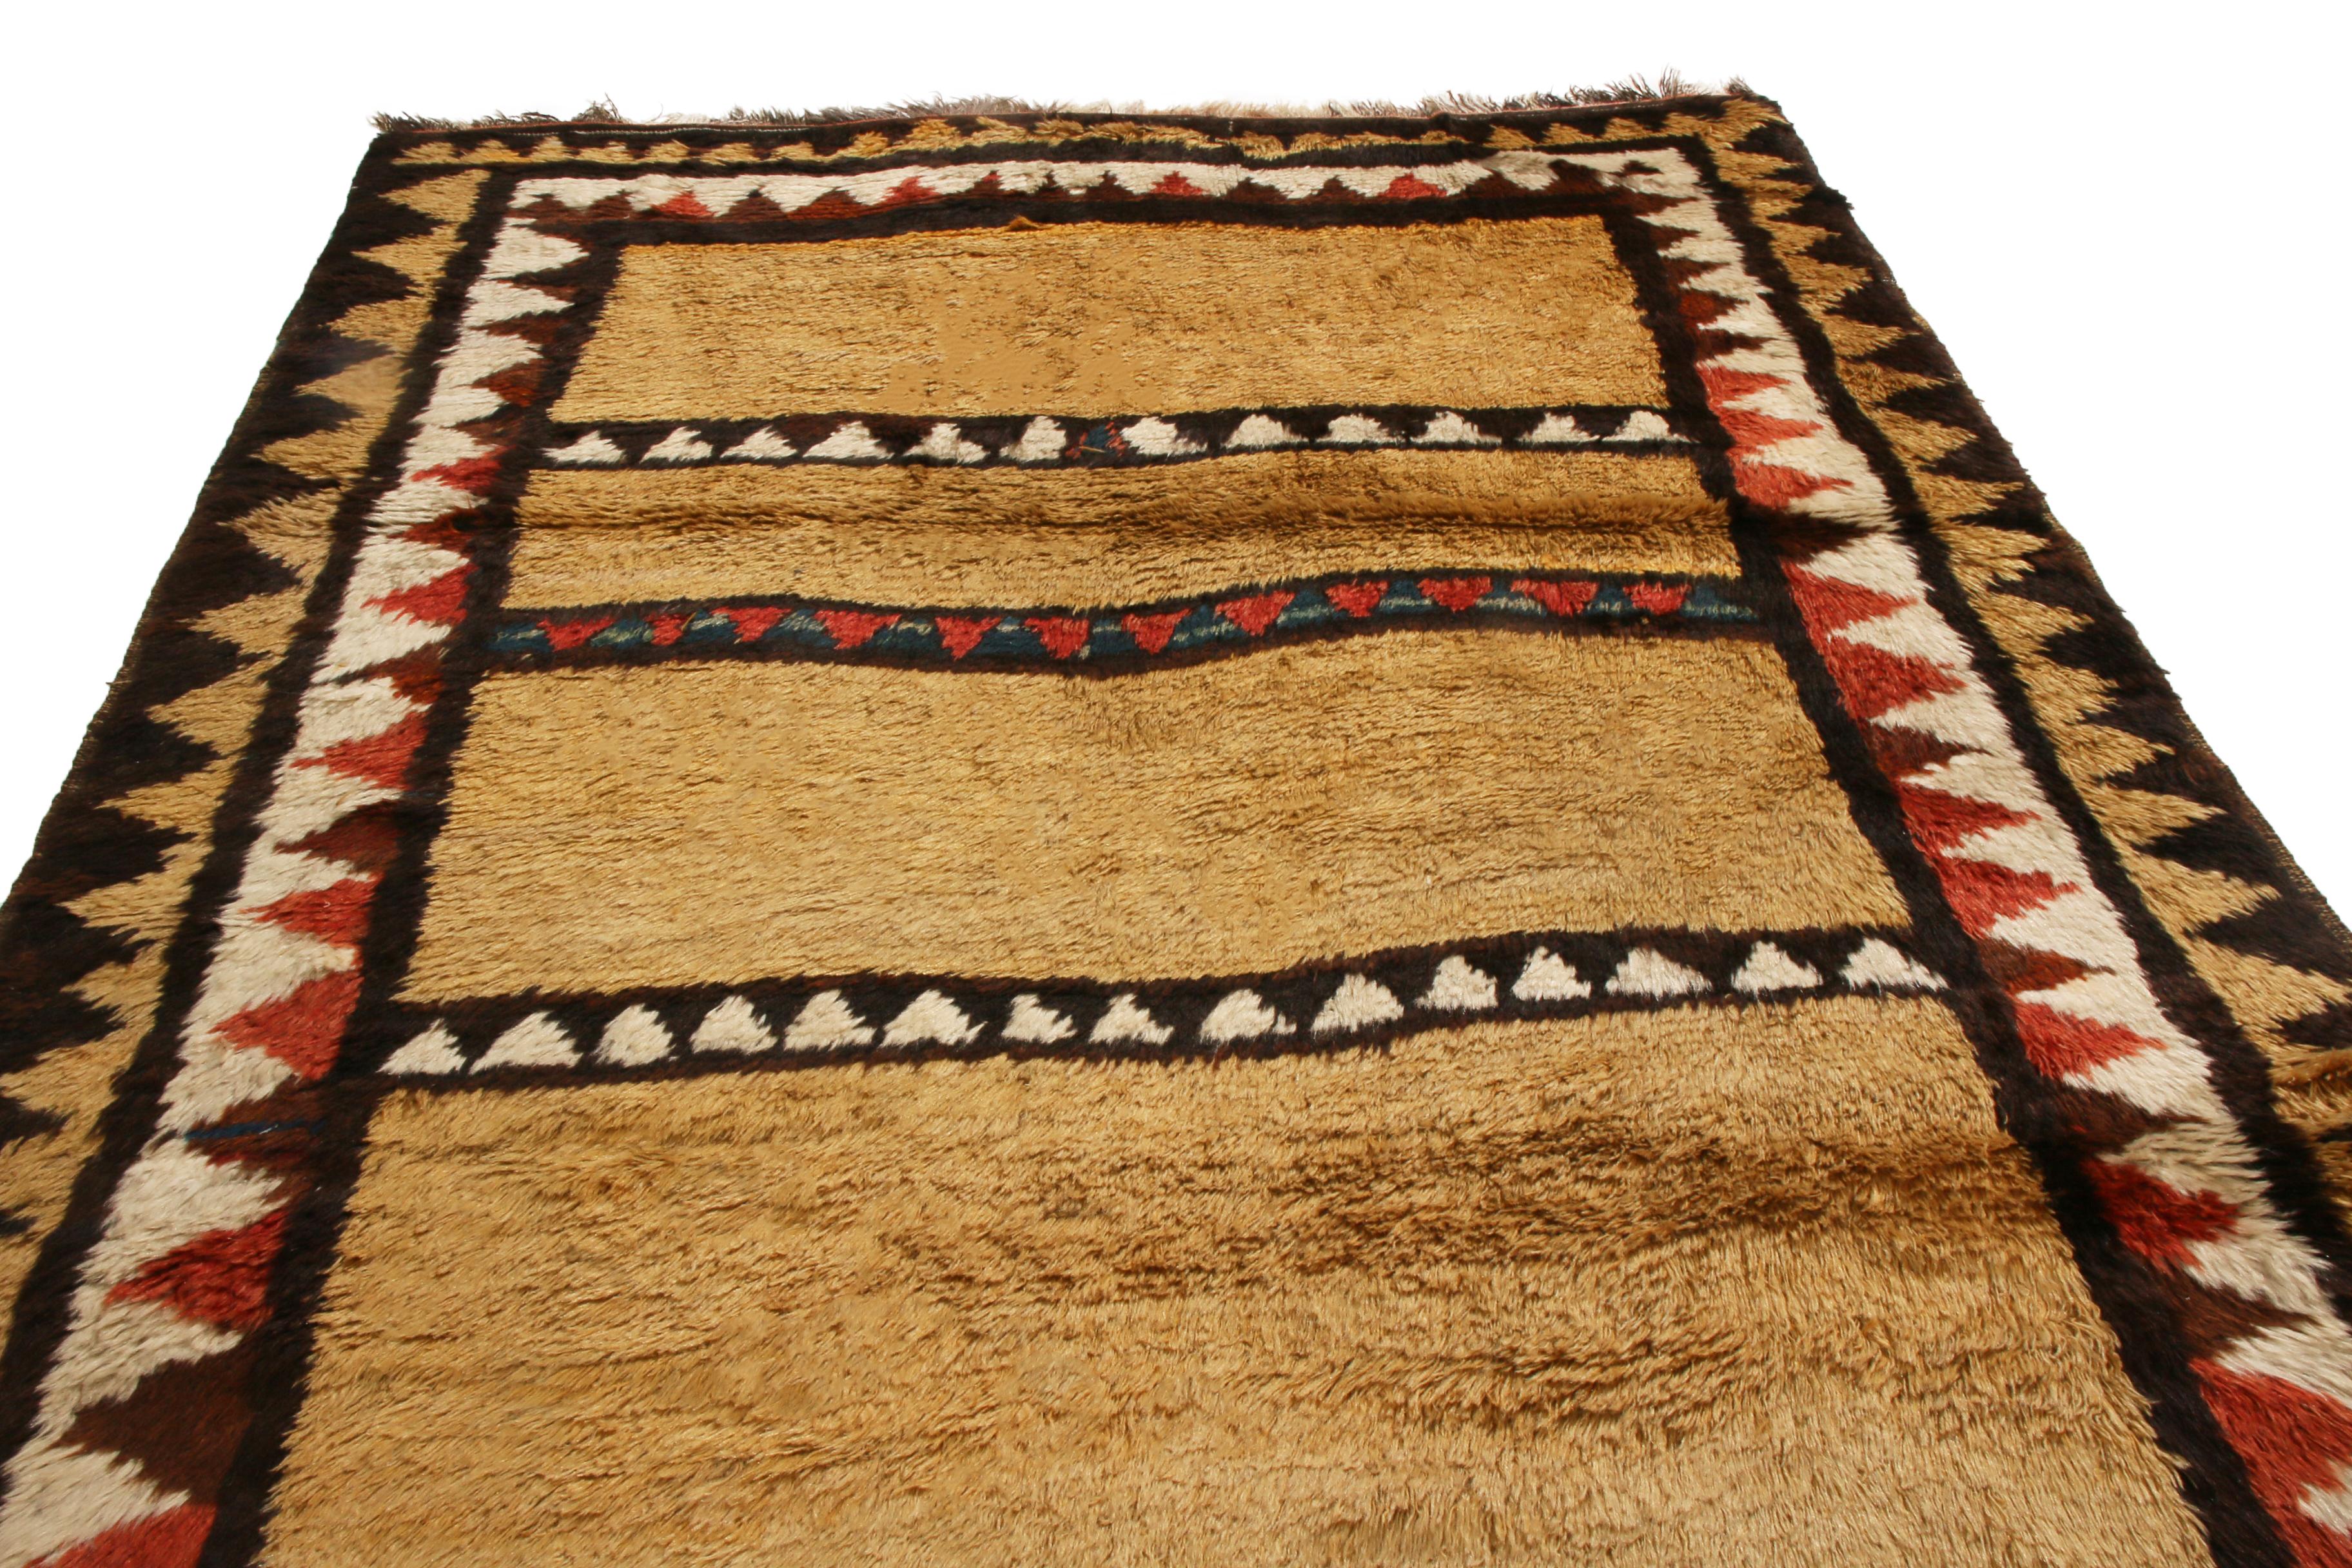 Originating from Russia between 1900-1920, this antique transitional Kurdish rug employs a Minimalist tribal design with mirrored abrash fringes along its vertical width. Hand knotted in lush, high quality wool pile, Kurdish pieces have been known